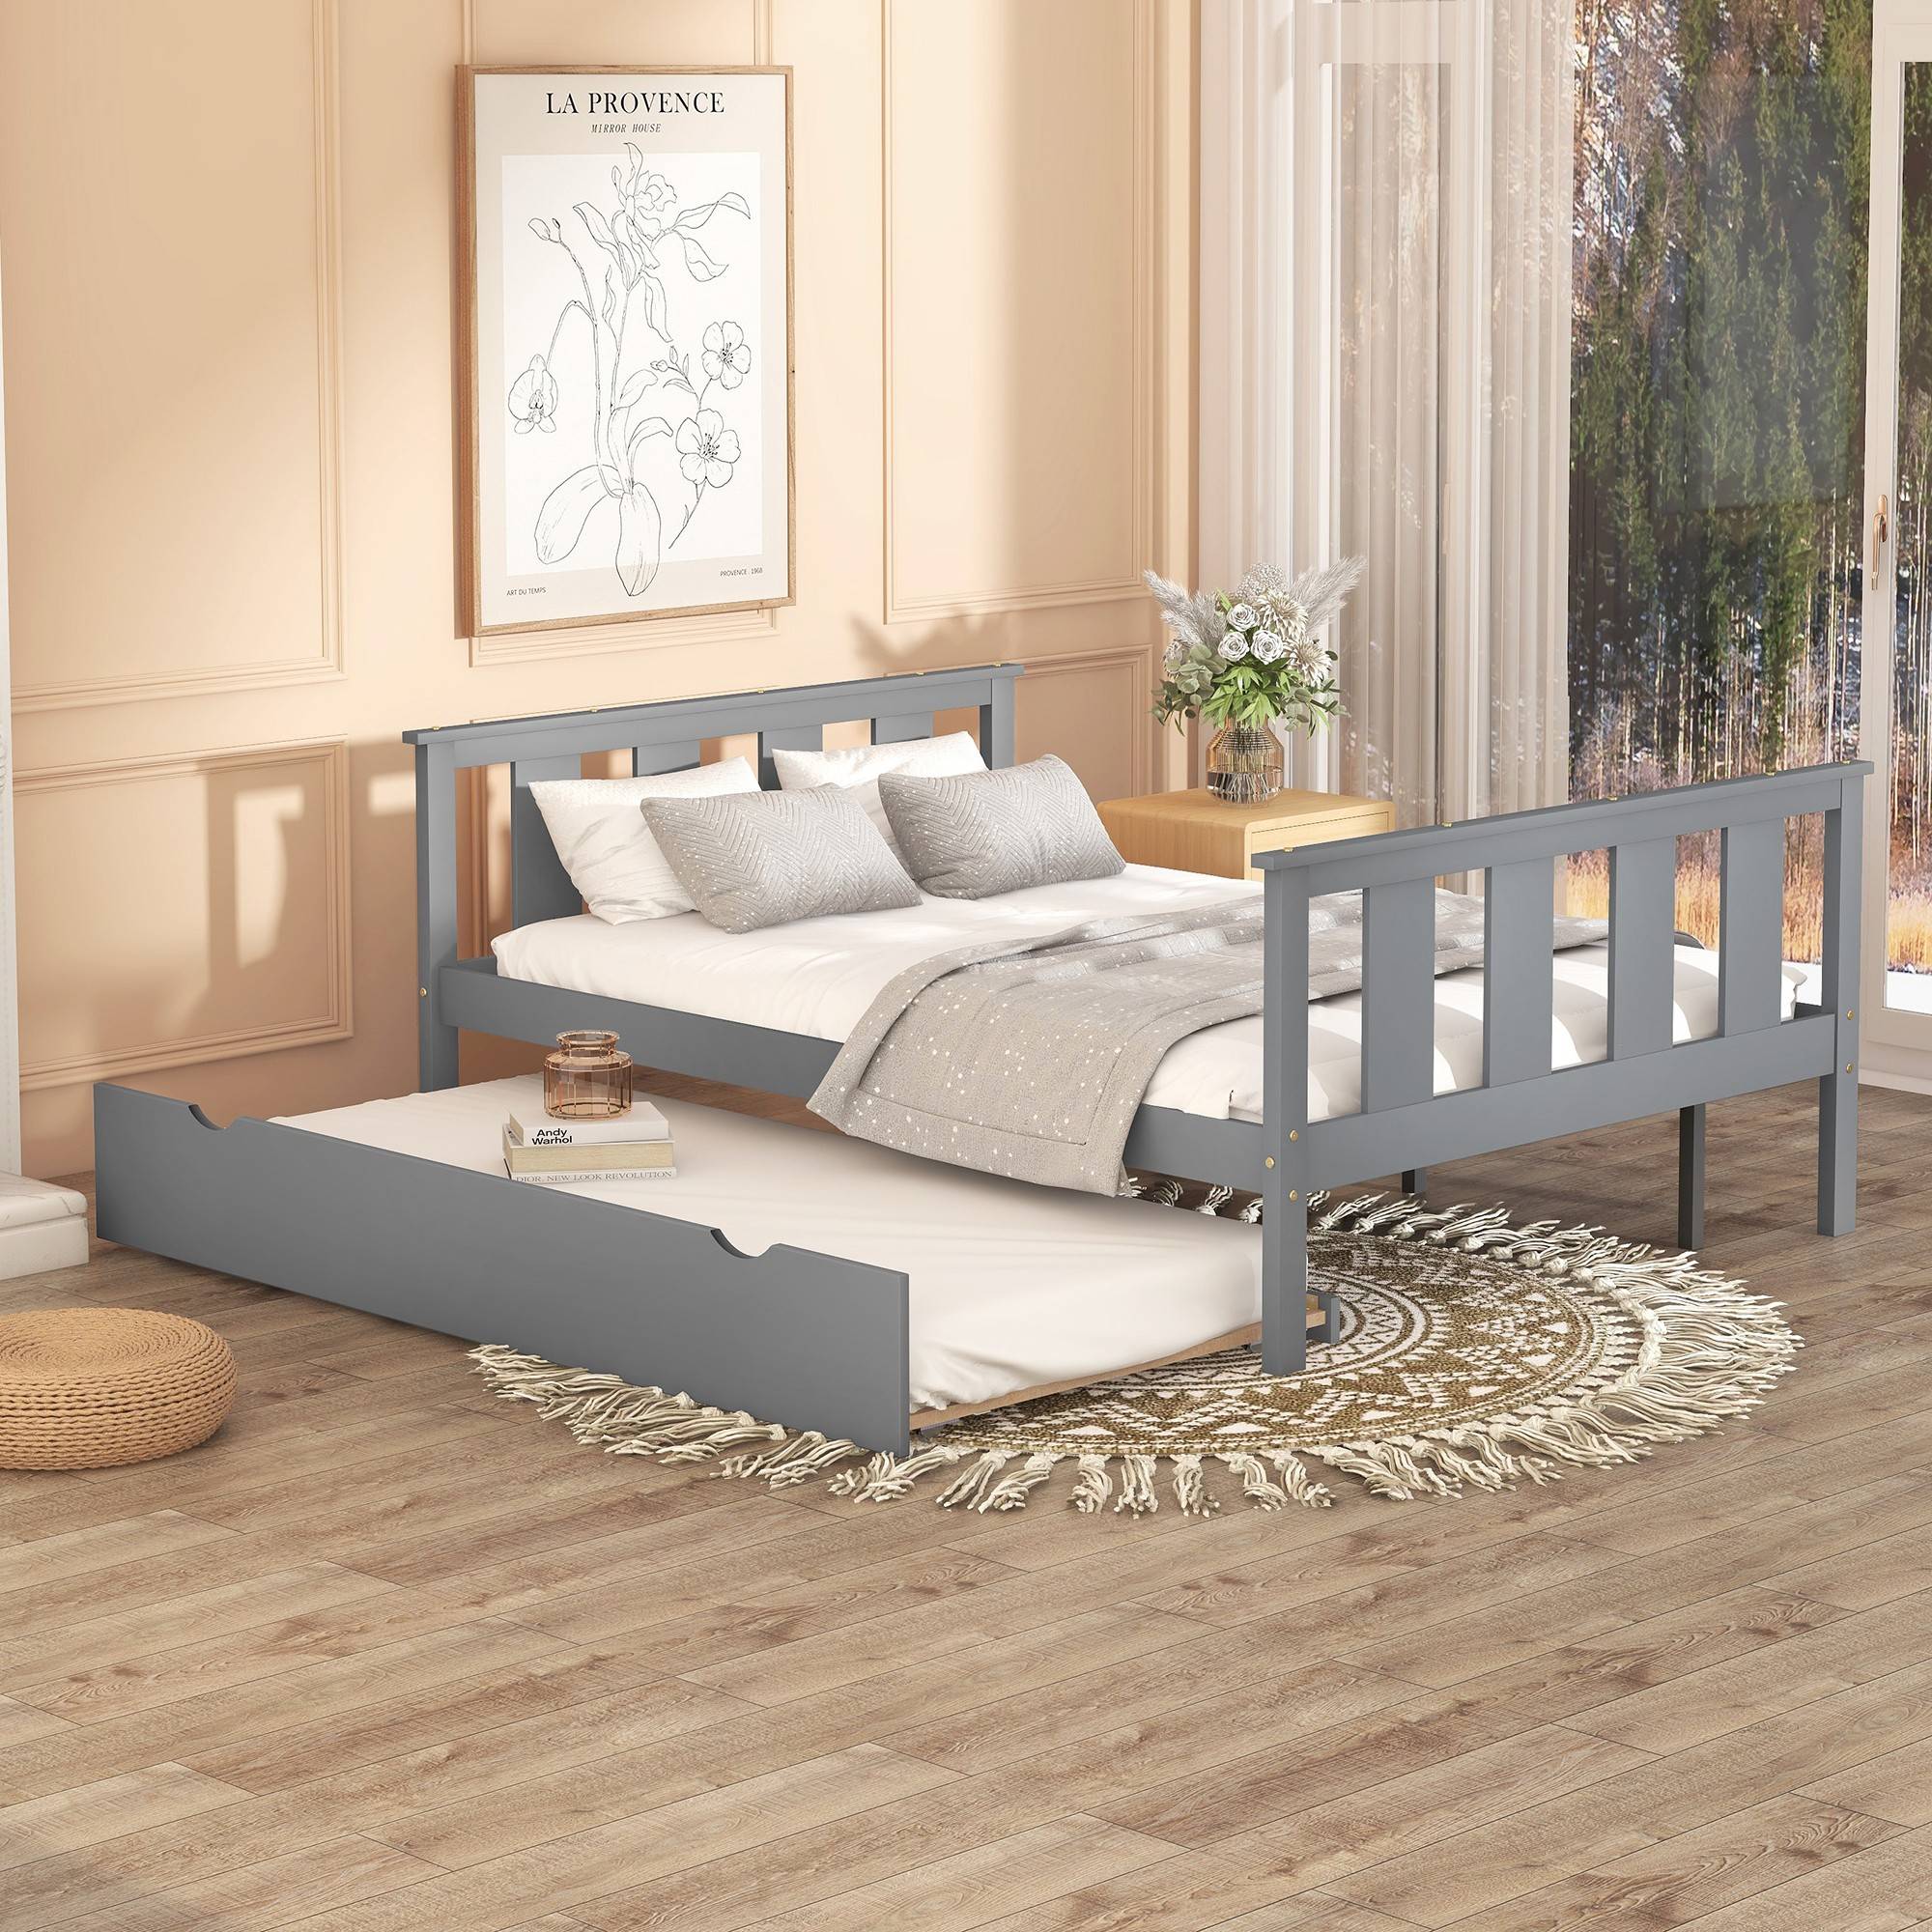 Yiekholo Full Bed with Trundle, Gray, Contemporary Style, Wood Frame ...